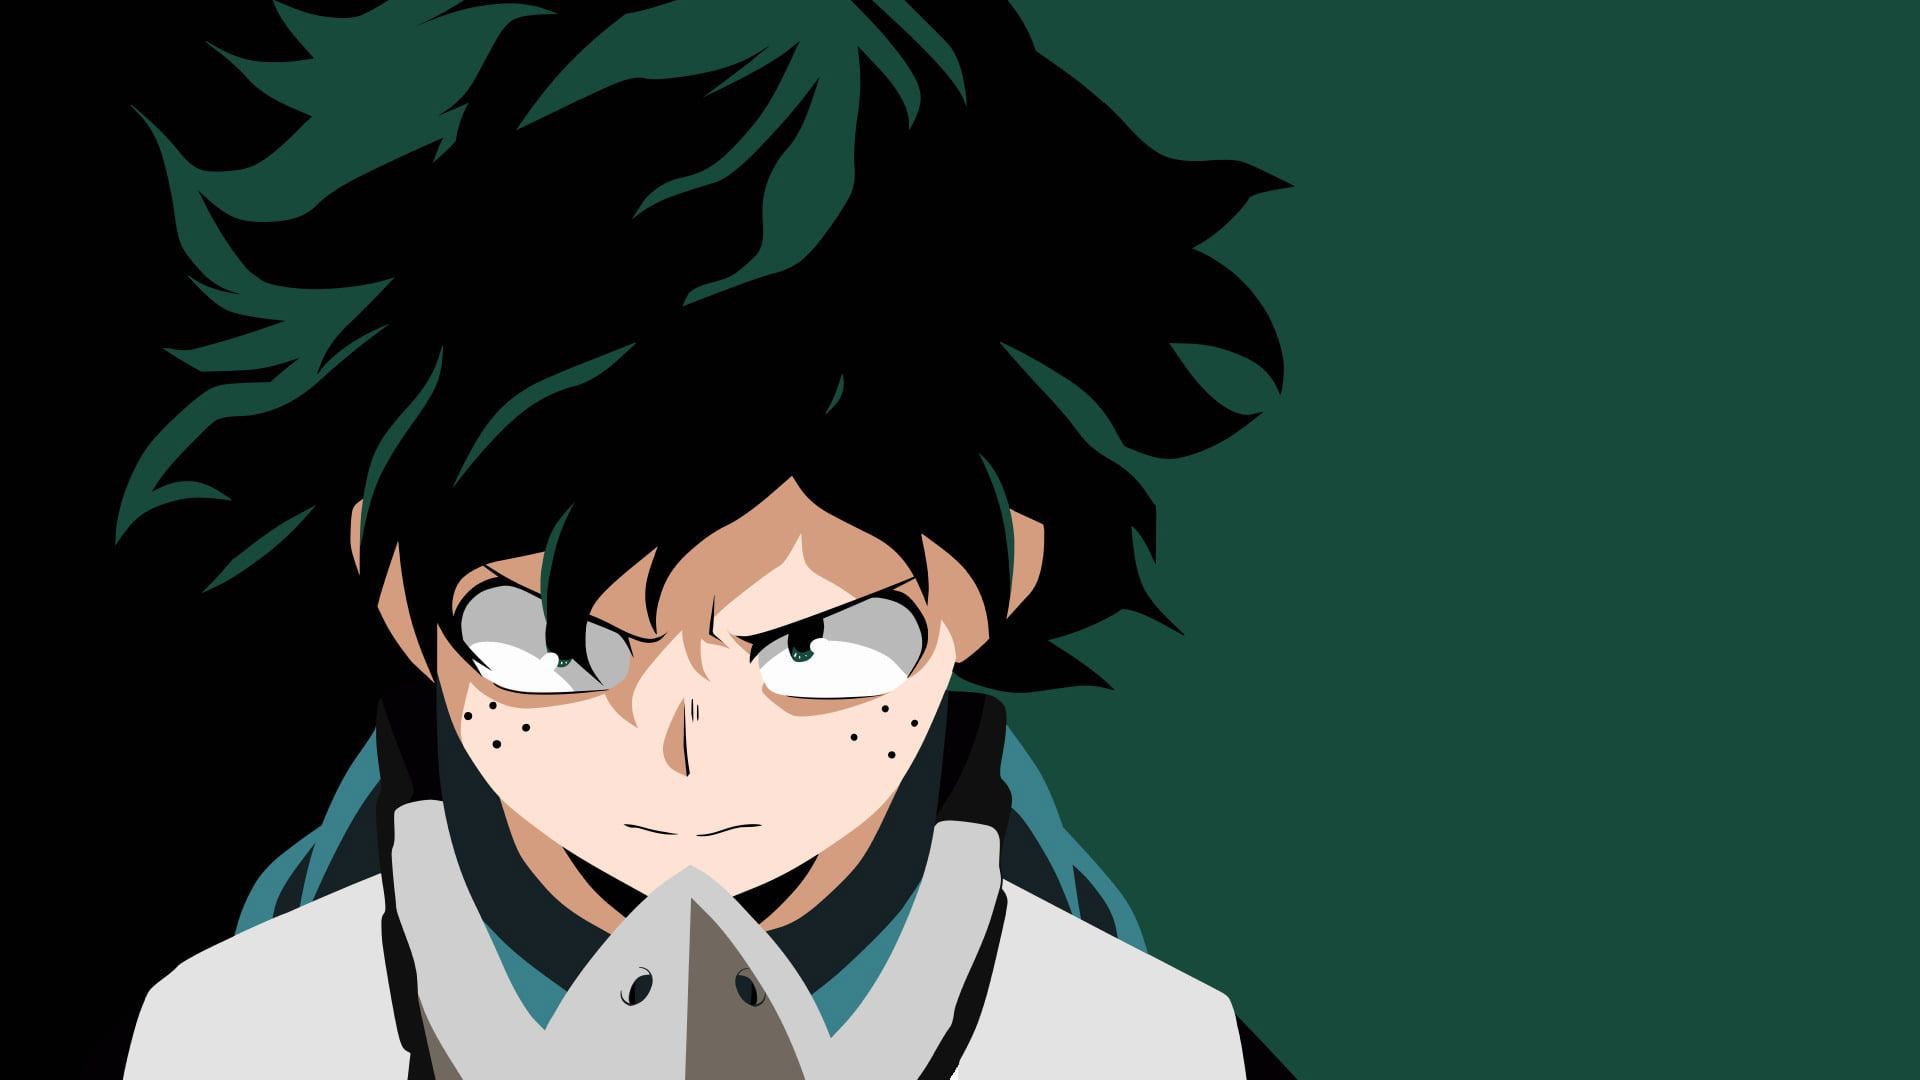 How Many Quirks Does Deku Have